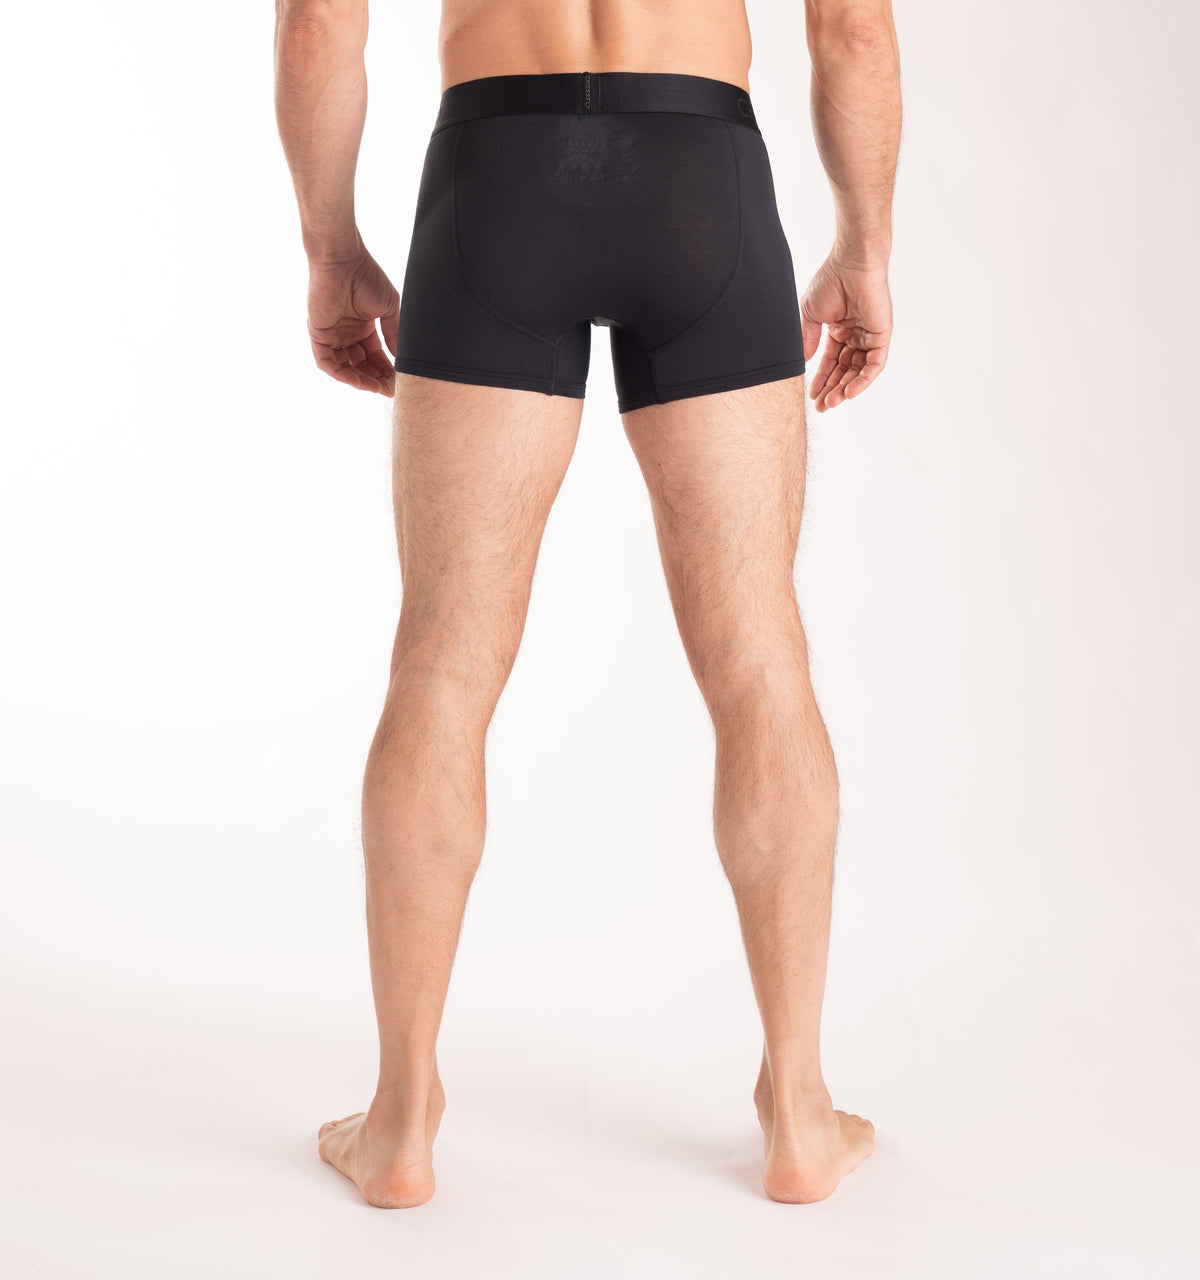 Crossfly men&#39;s IKON 3&quot; black trunks from the Everyday series, featuring X-Fly and Coccoon internal pocket support.